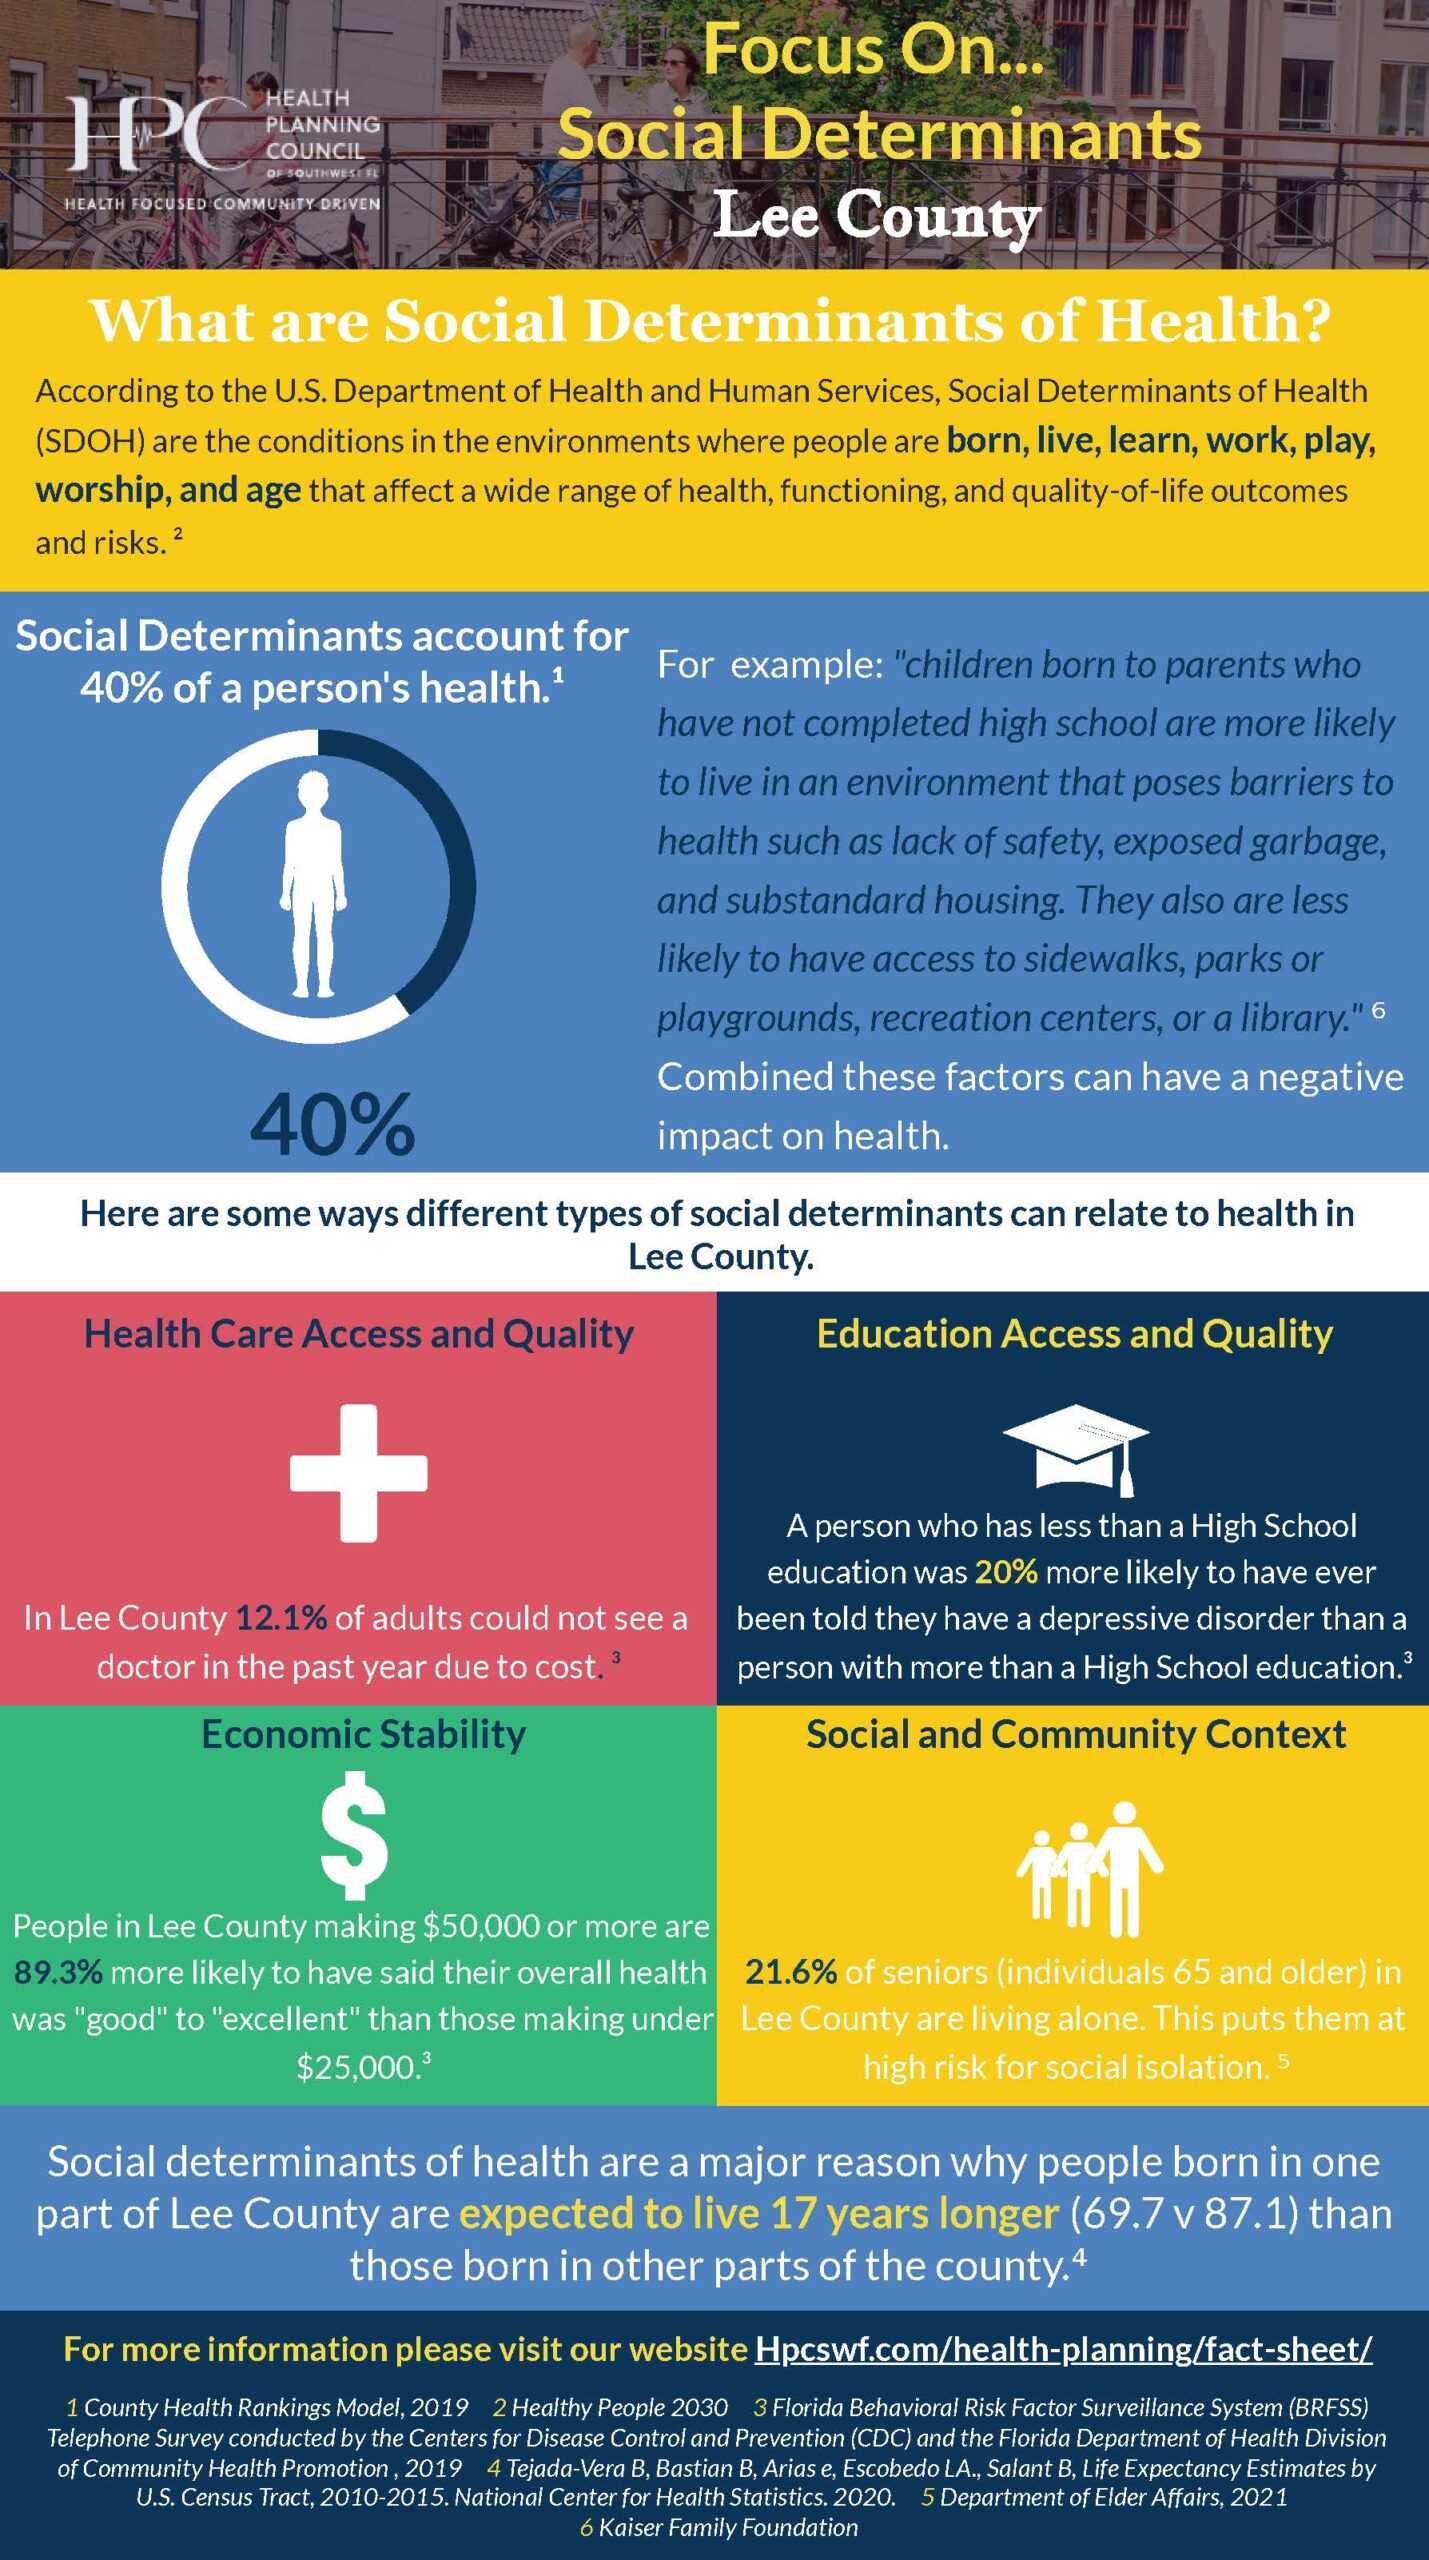 Fact Sheet - Health Planning Council of Southwest Florida